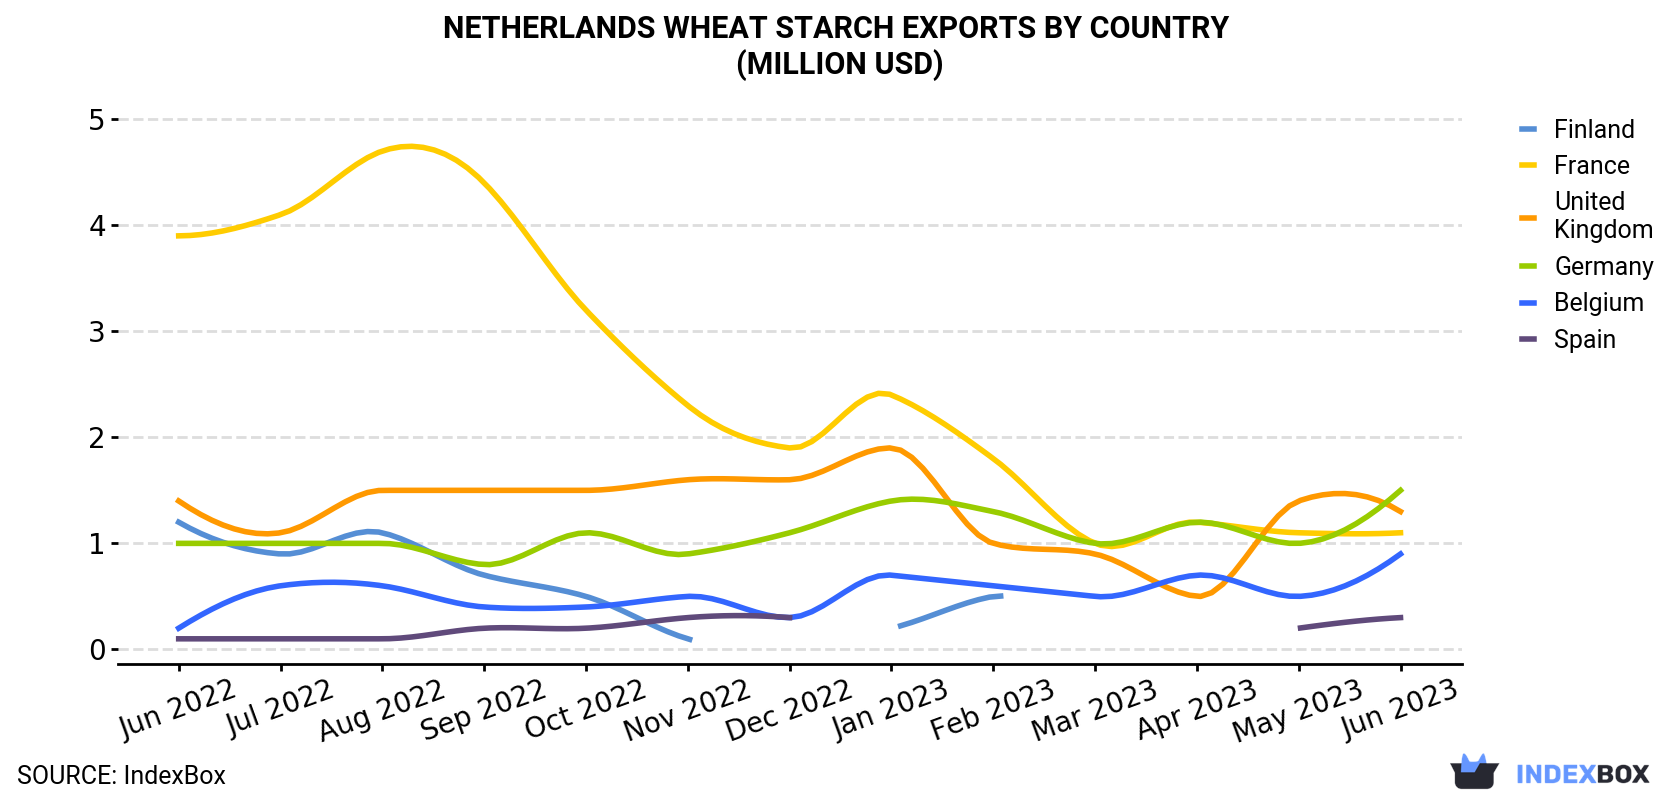 Netherlands Wheat Starch Exports By Country (Million USD)